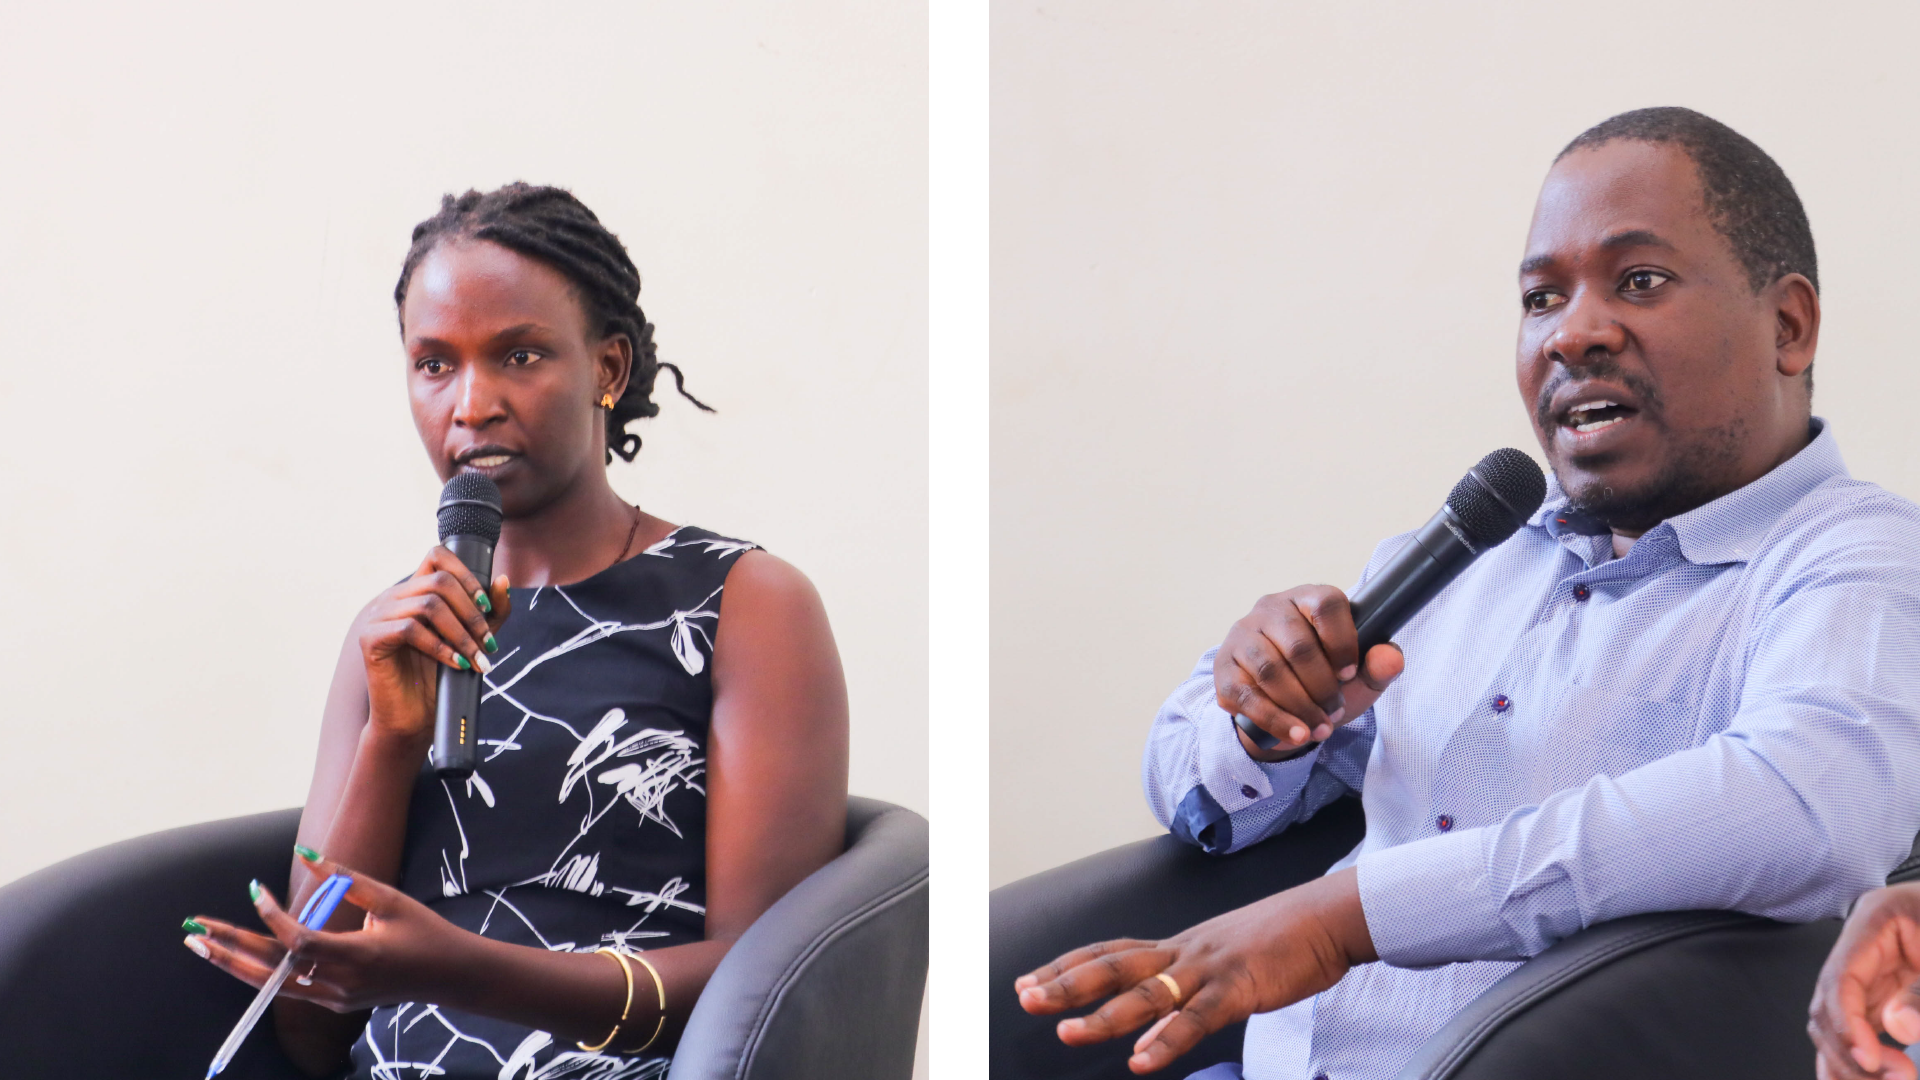 Mr. Tonny Kawuki, the Principal Specialist in Statistics at the Directorate of Value for Money and Specialized Audits, Office of the Auditor General (OAG) and Ms. Fiona Auma, the Monitoring and Evaluation Officer at the Petroleum Authority of Uganda (PAU) submit in a panel discussion during the training